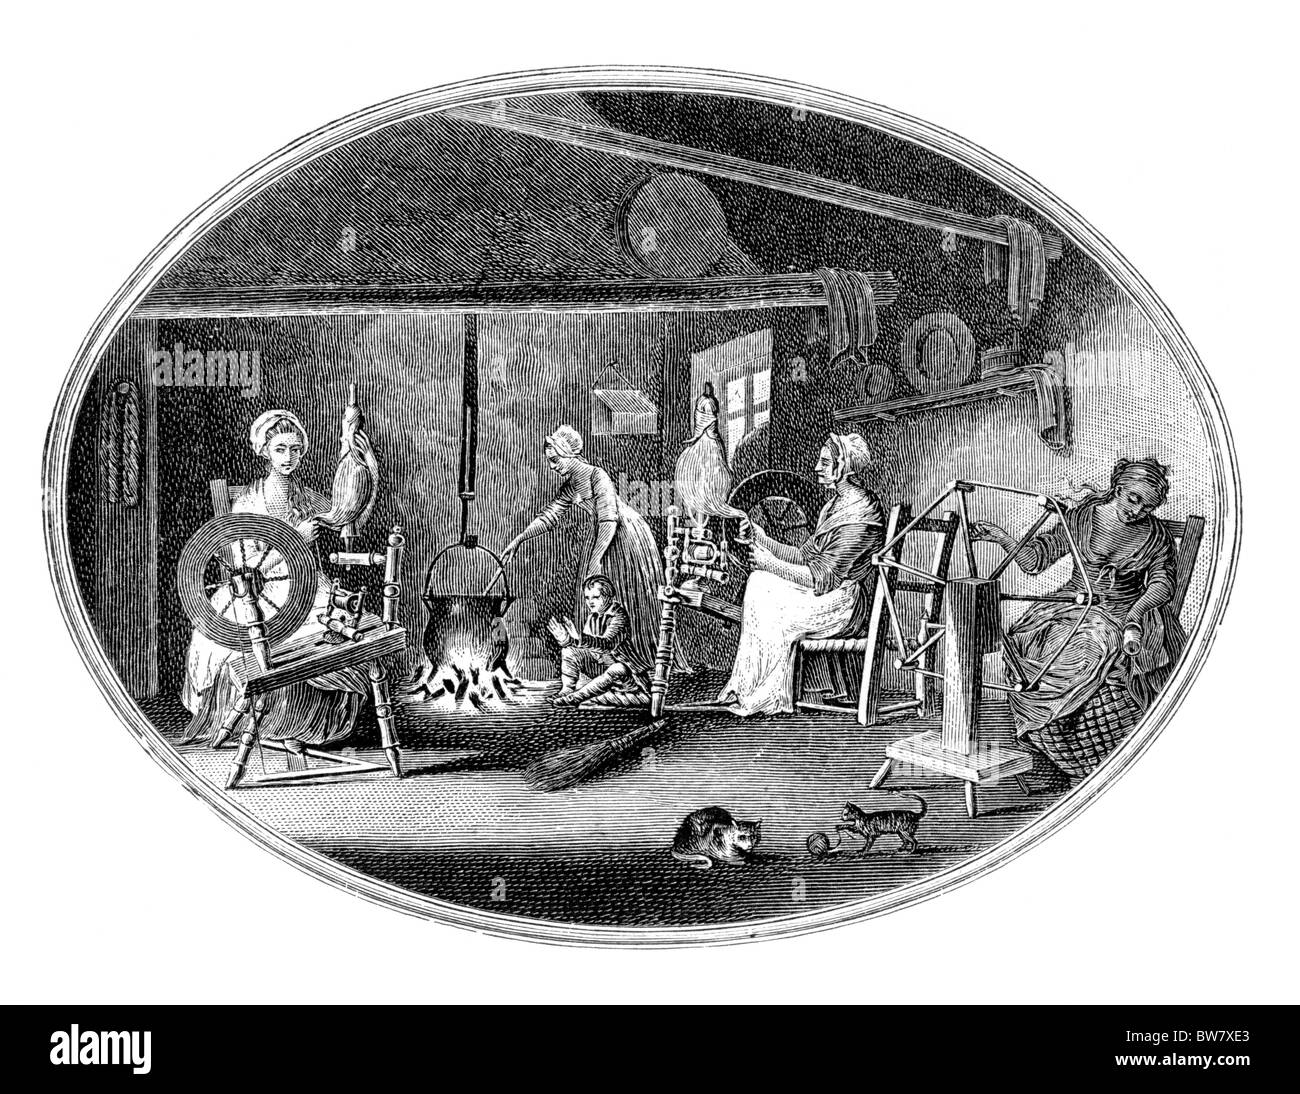 The Linen Industry in the 18th Century; Spinning, Reeling with the clock reel and Boiling Yarn; Black and White Illustration; Stock Photo